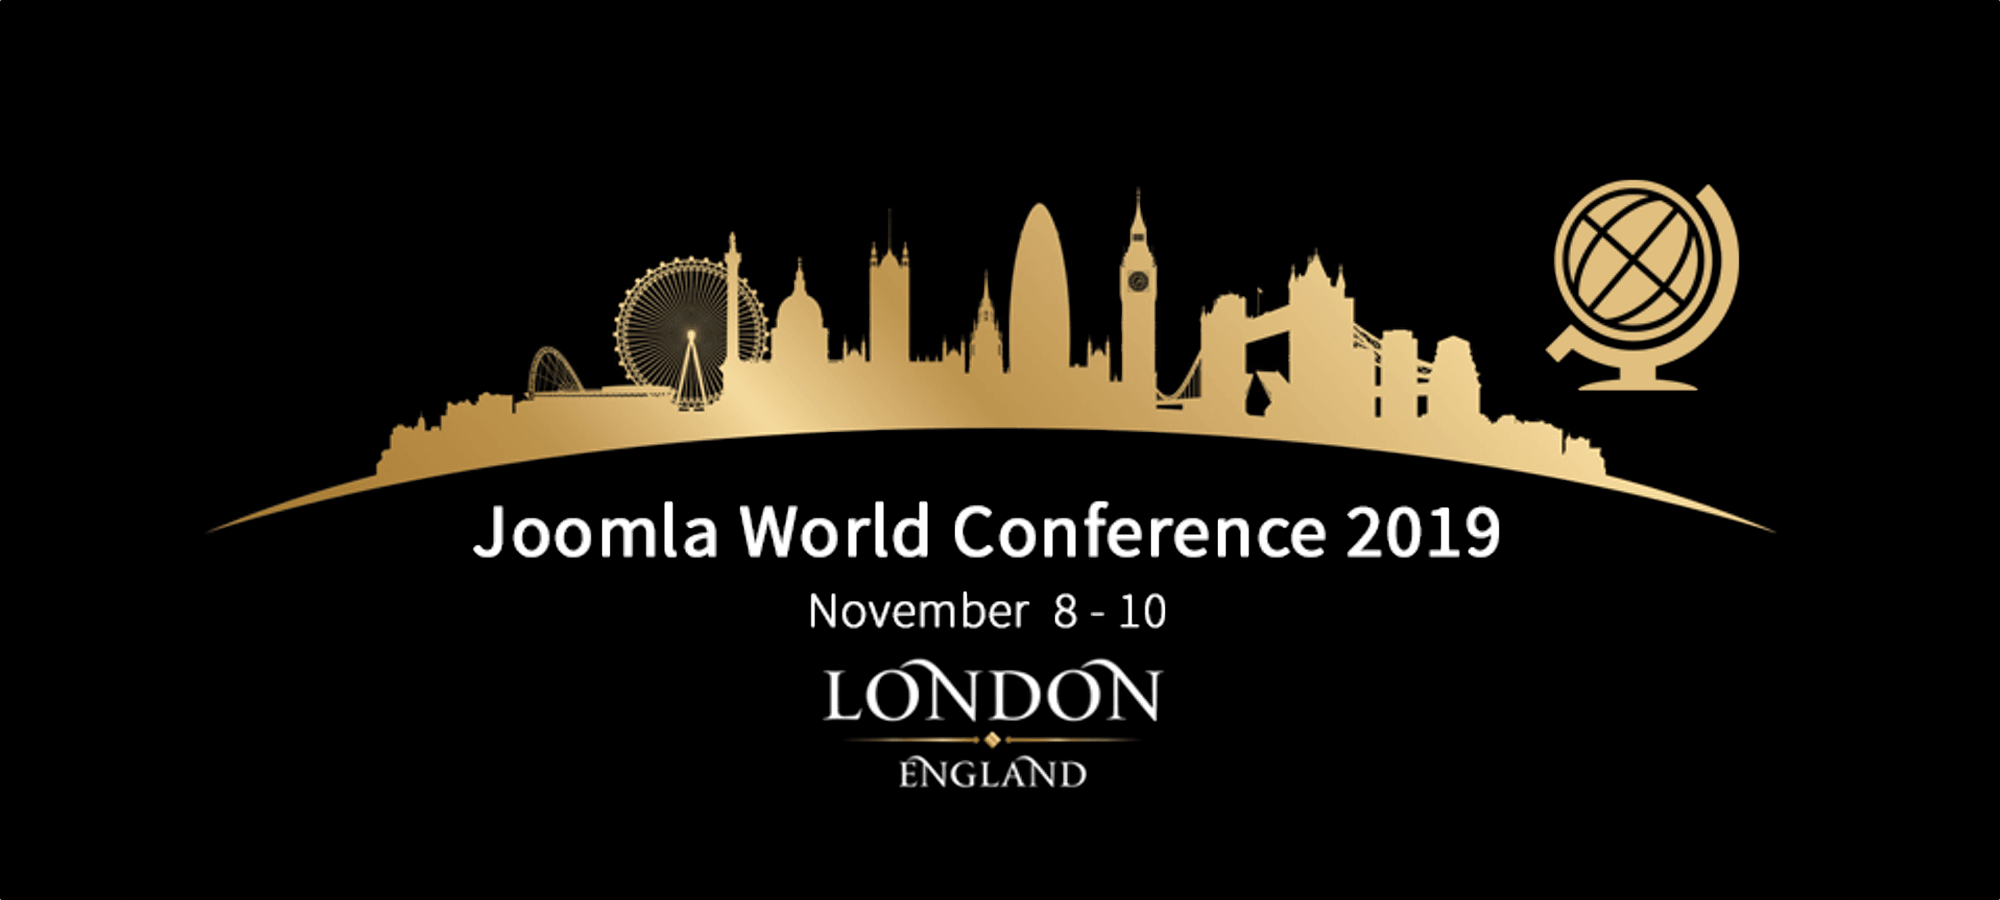 The 2019 Joomla World Conference is in London